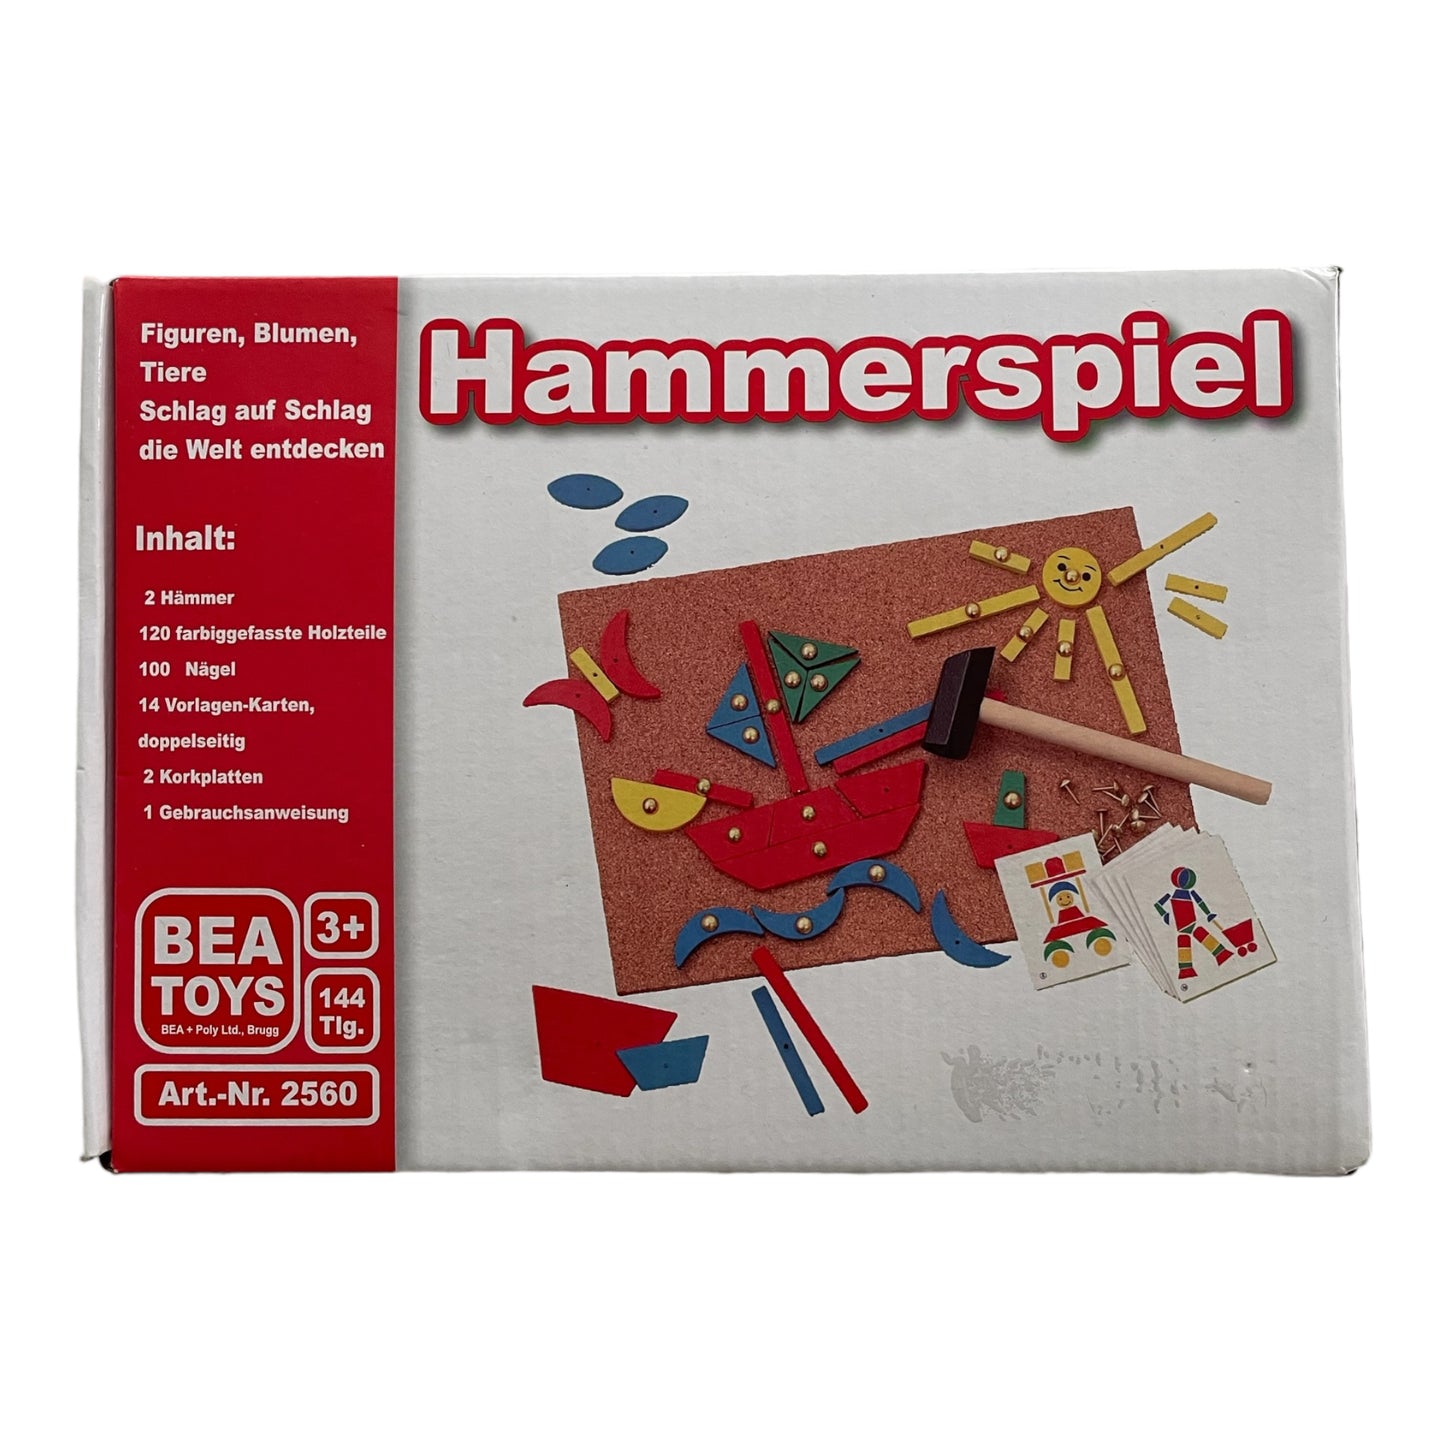 Hammer game set from 2 to 144 pieces